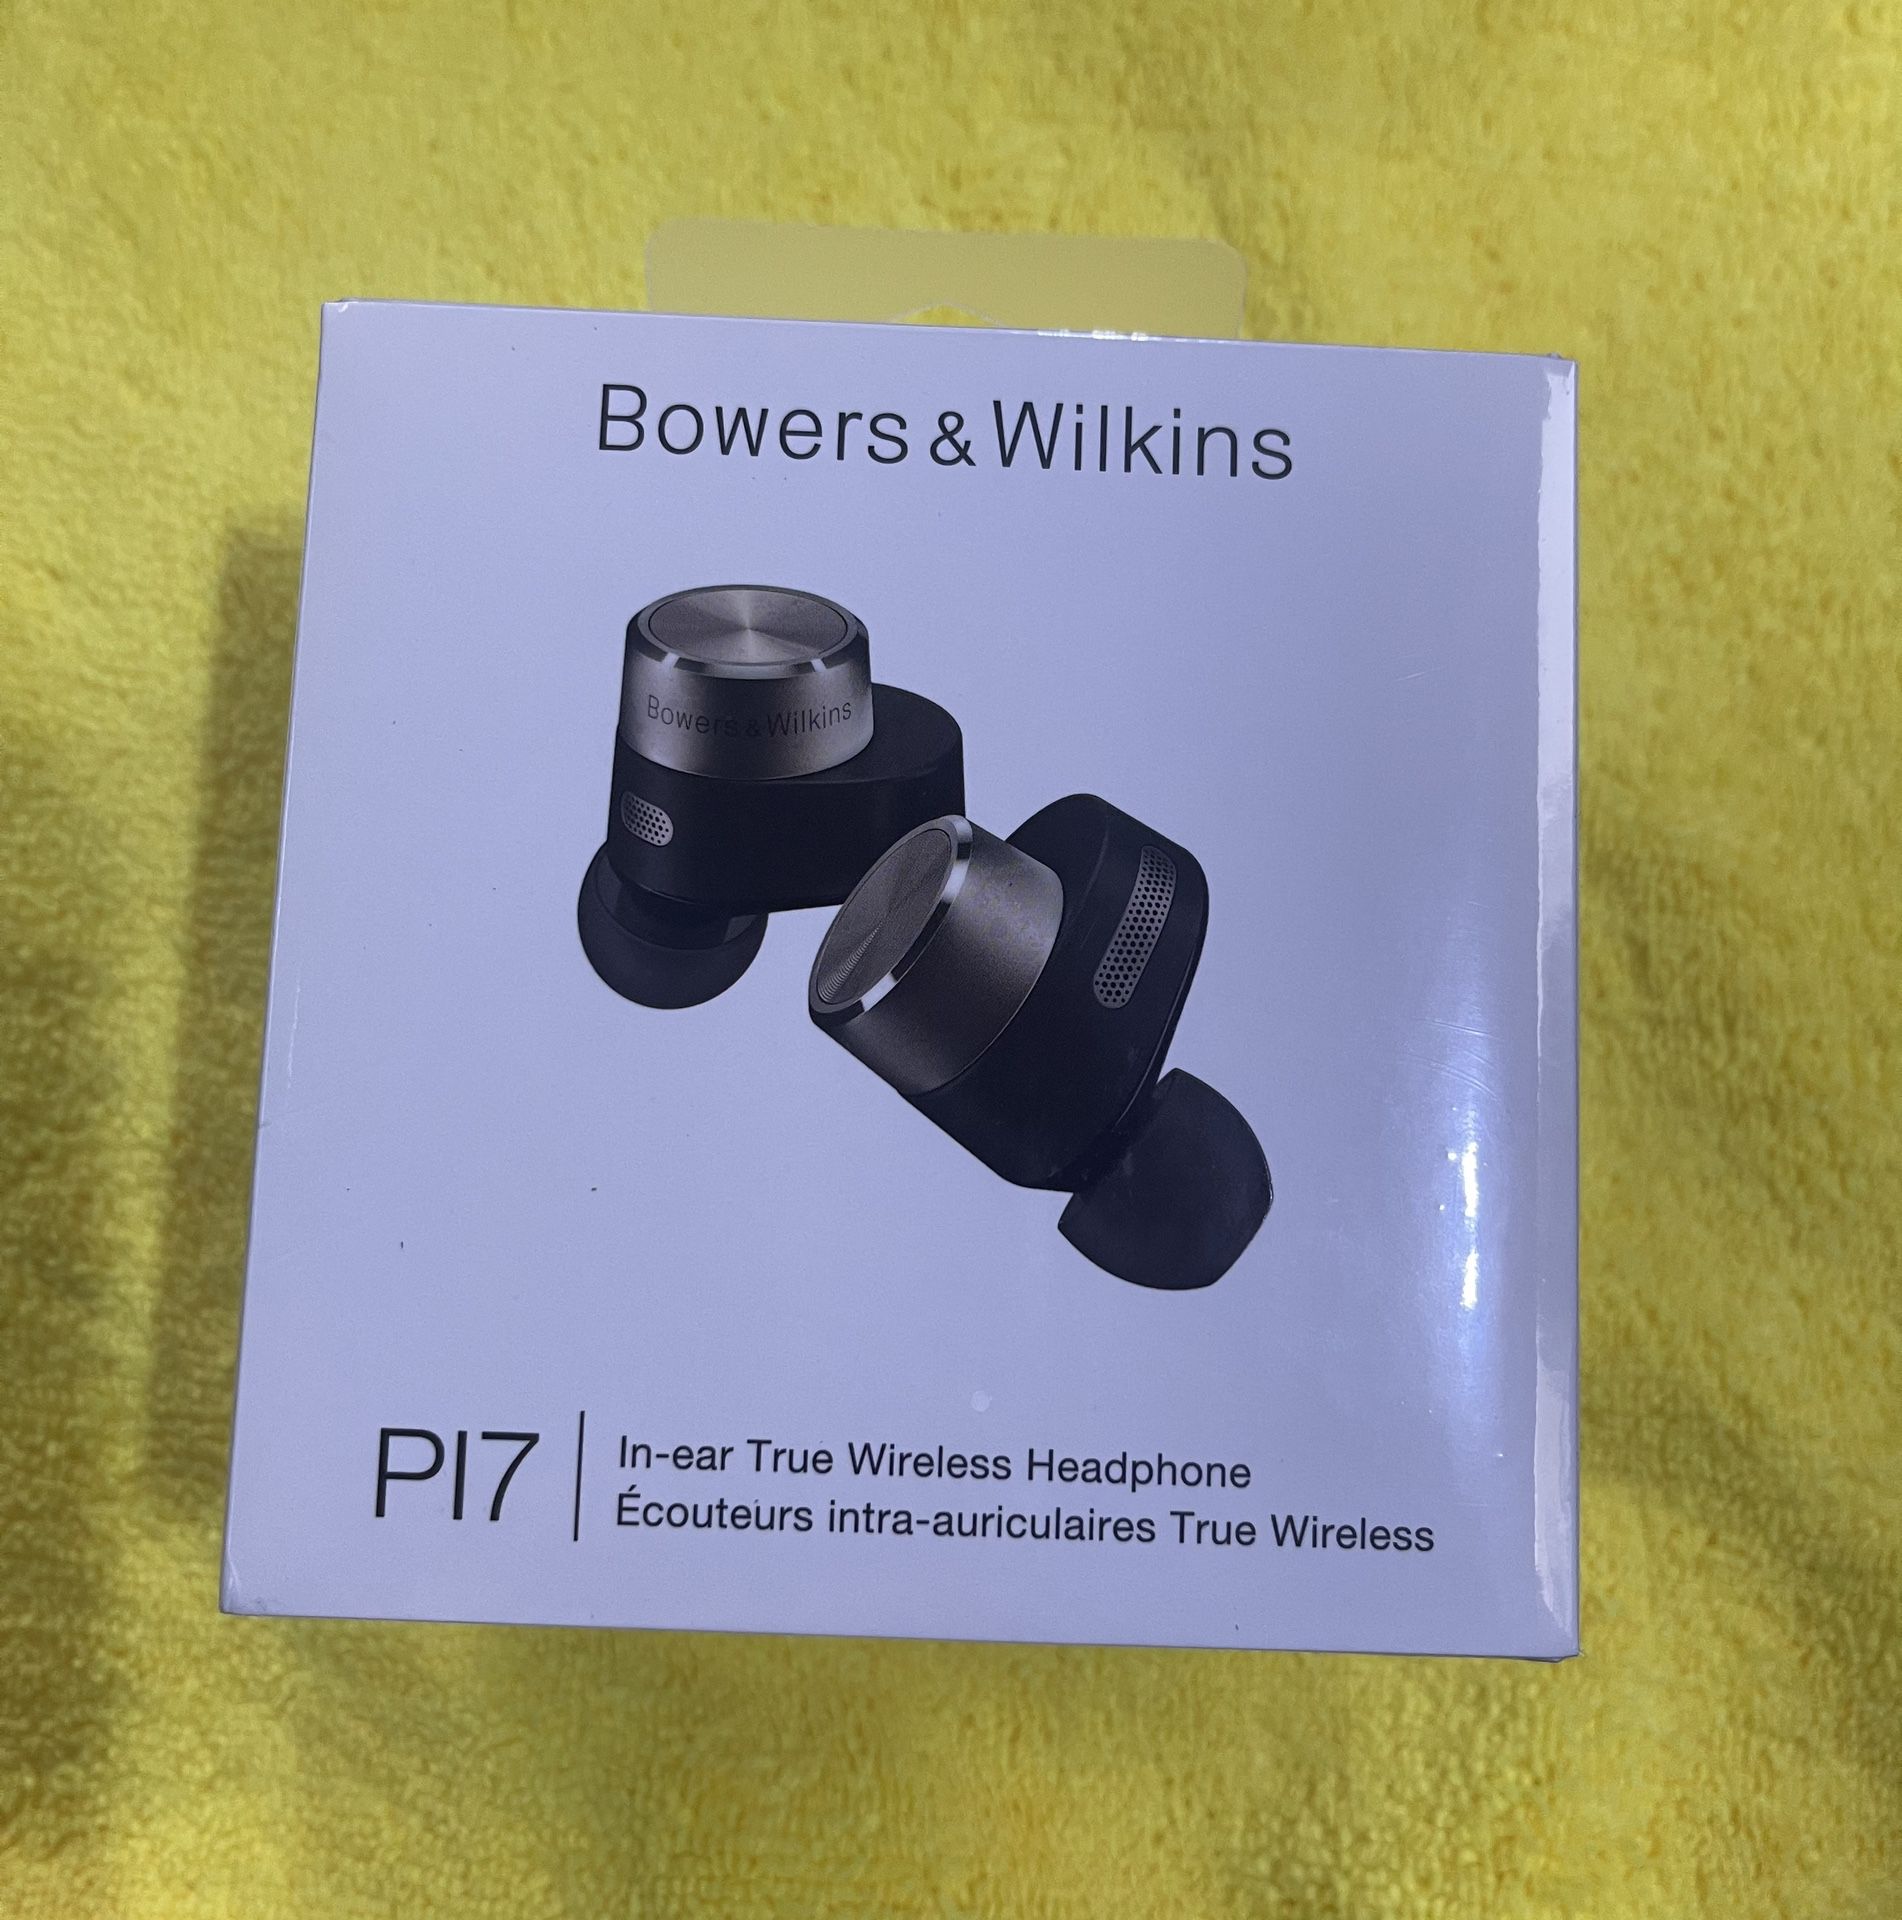 Bowers & Wilkins PI7 in-Ear True Wireless Headphones with 6 Built-in Mics, Bluetooth 5.0 with Qualcomm aptX & Dual Hybrid Drivers, Advanced Noise Canc